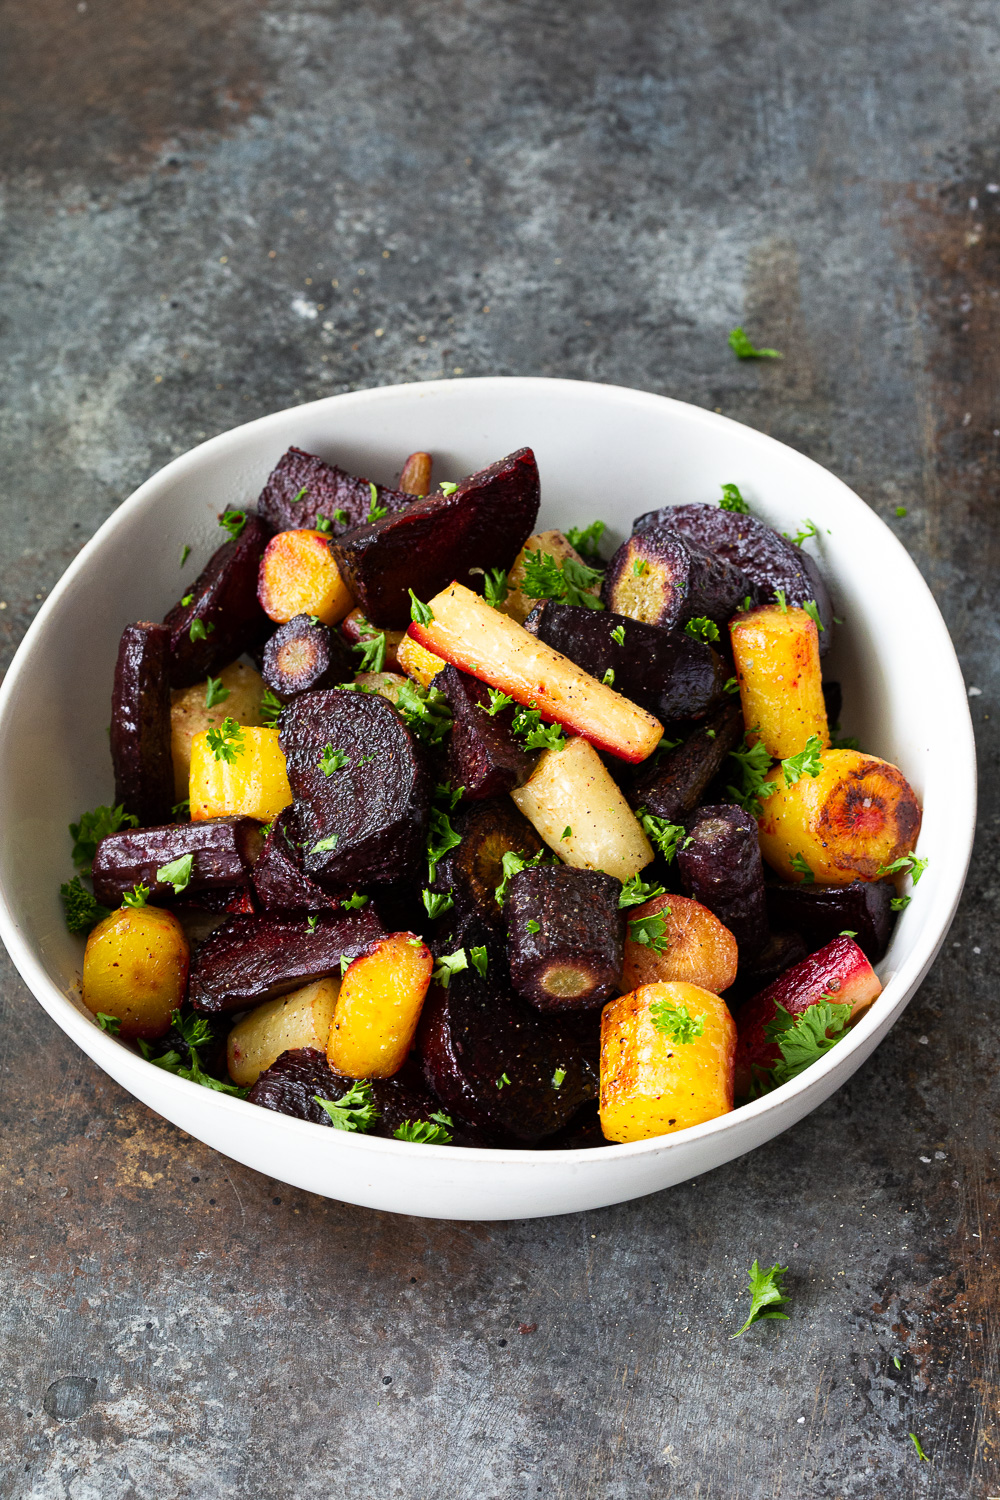 Oven Roasted Carrots and Beets [Video]